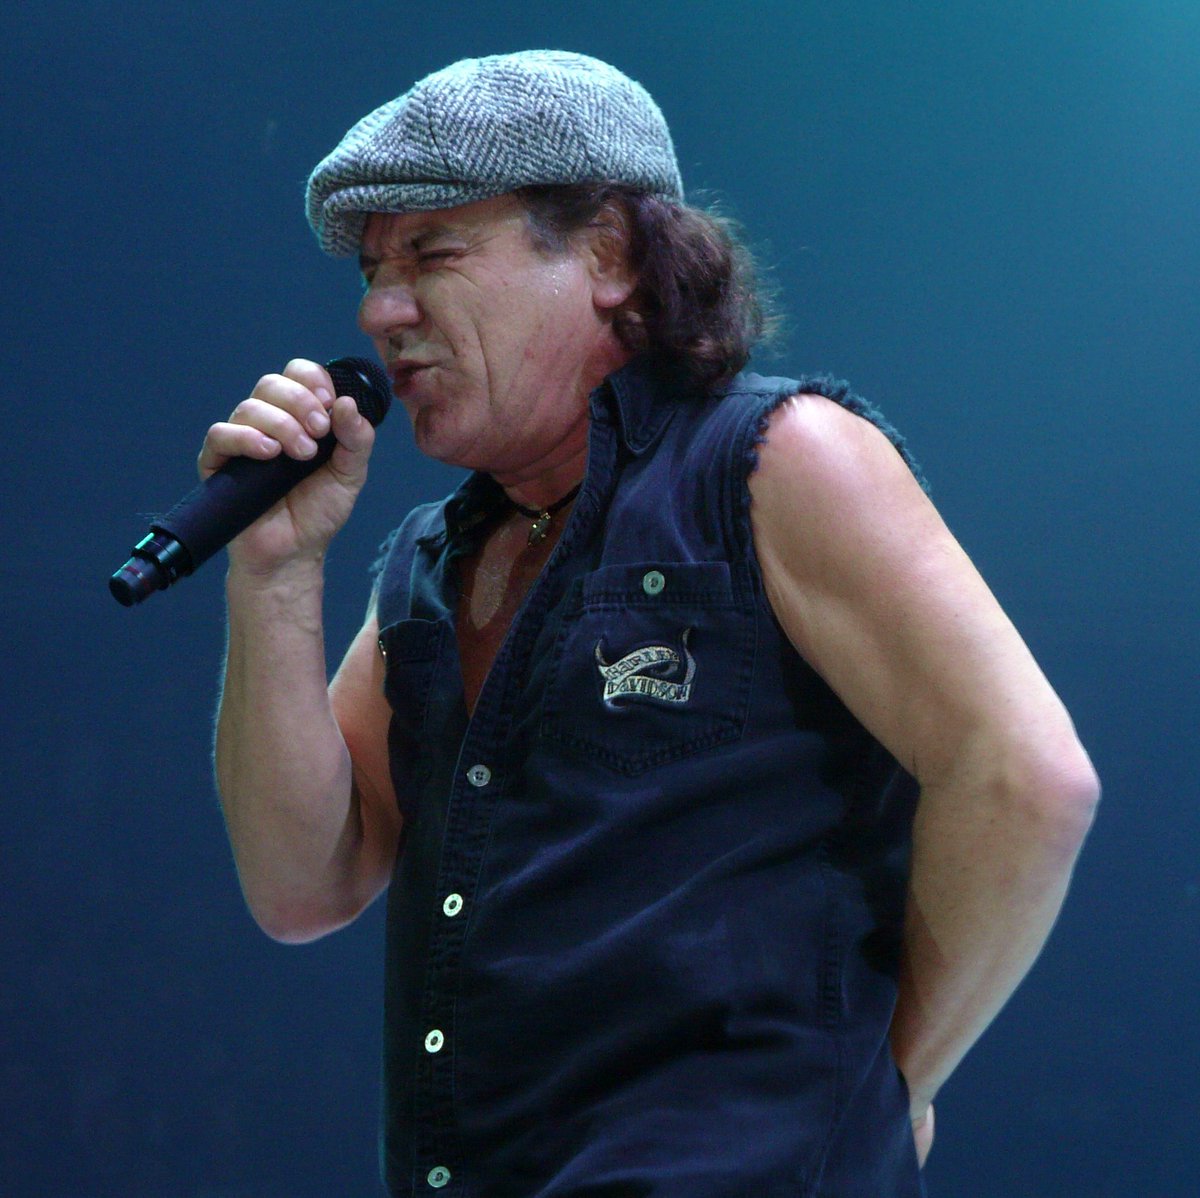 Brian JohnsonFrom AC/DC, has hearing problems.